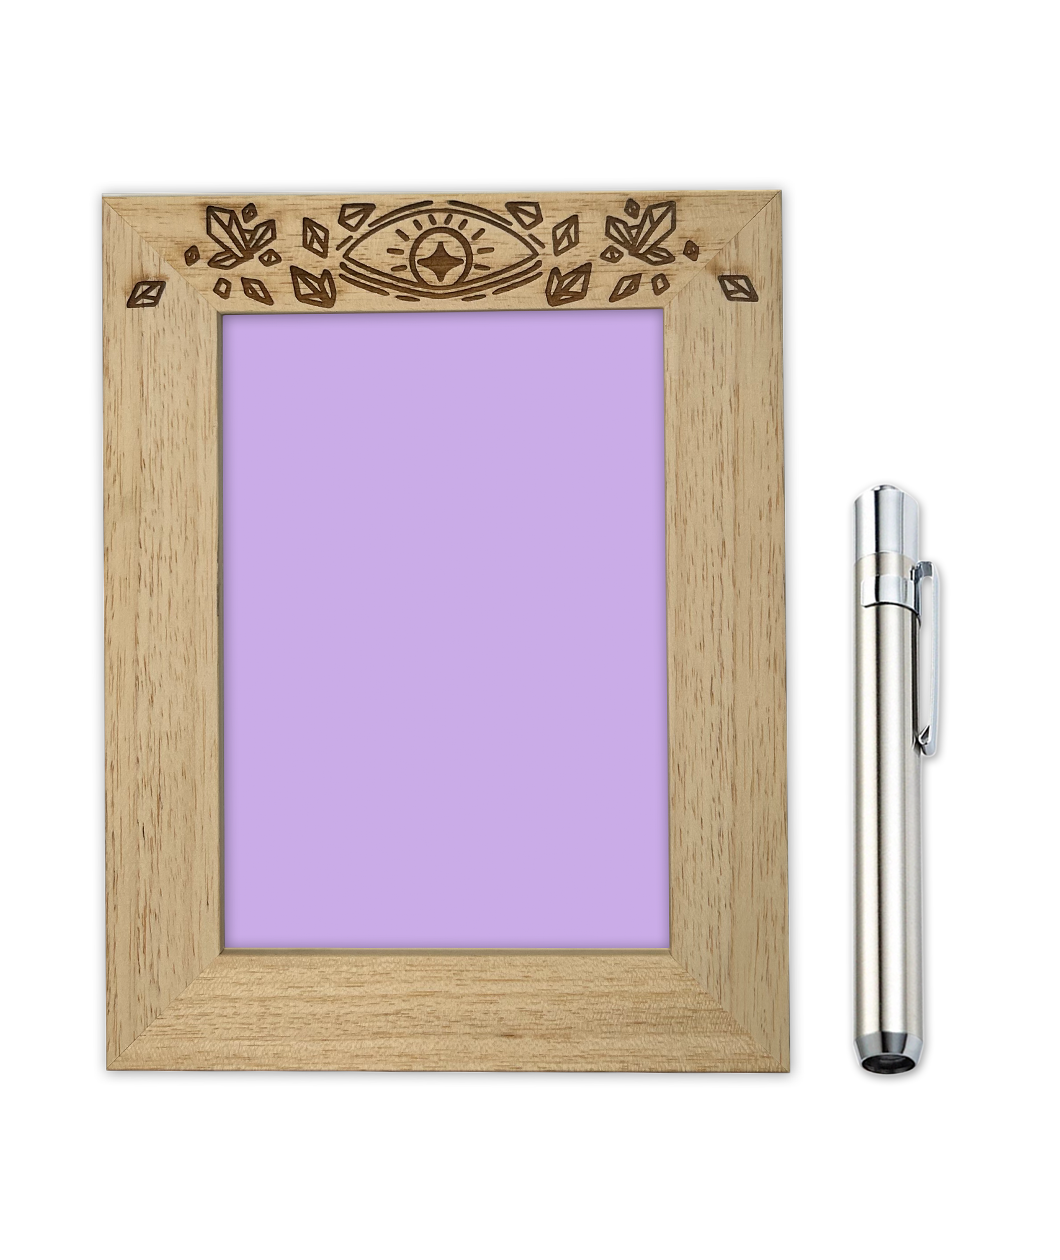 A wooden frame with printed crystals on the top. The middle of the frame has a light purple background. A UV pen sits beside it. From Tyler Thrasher. 